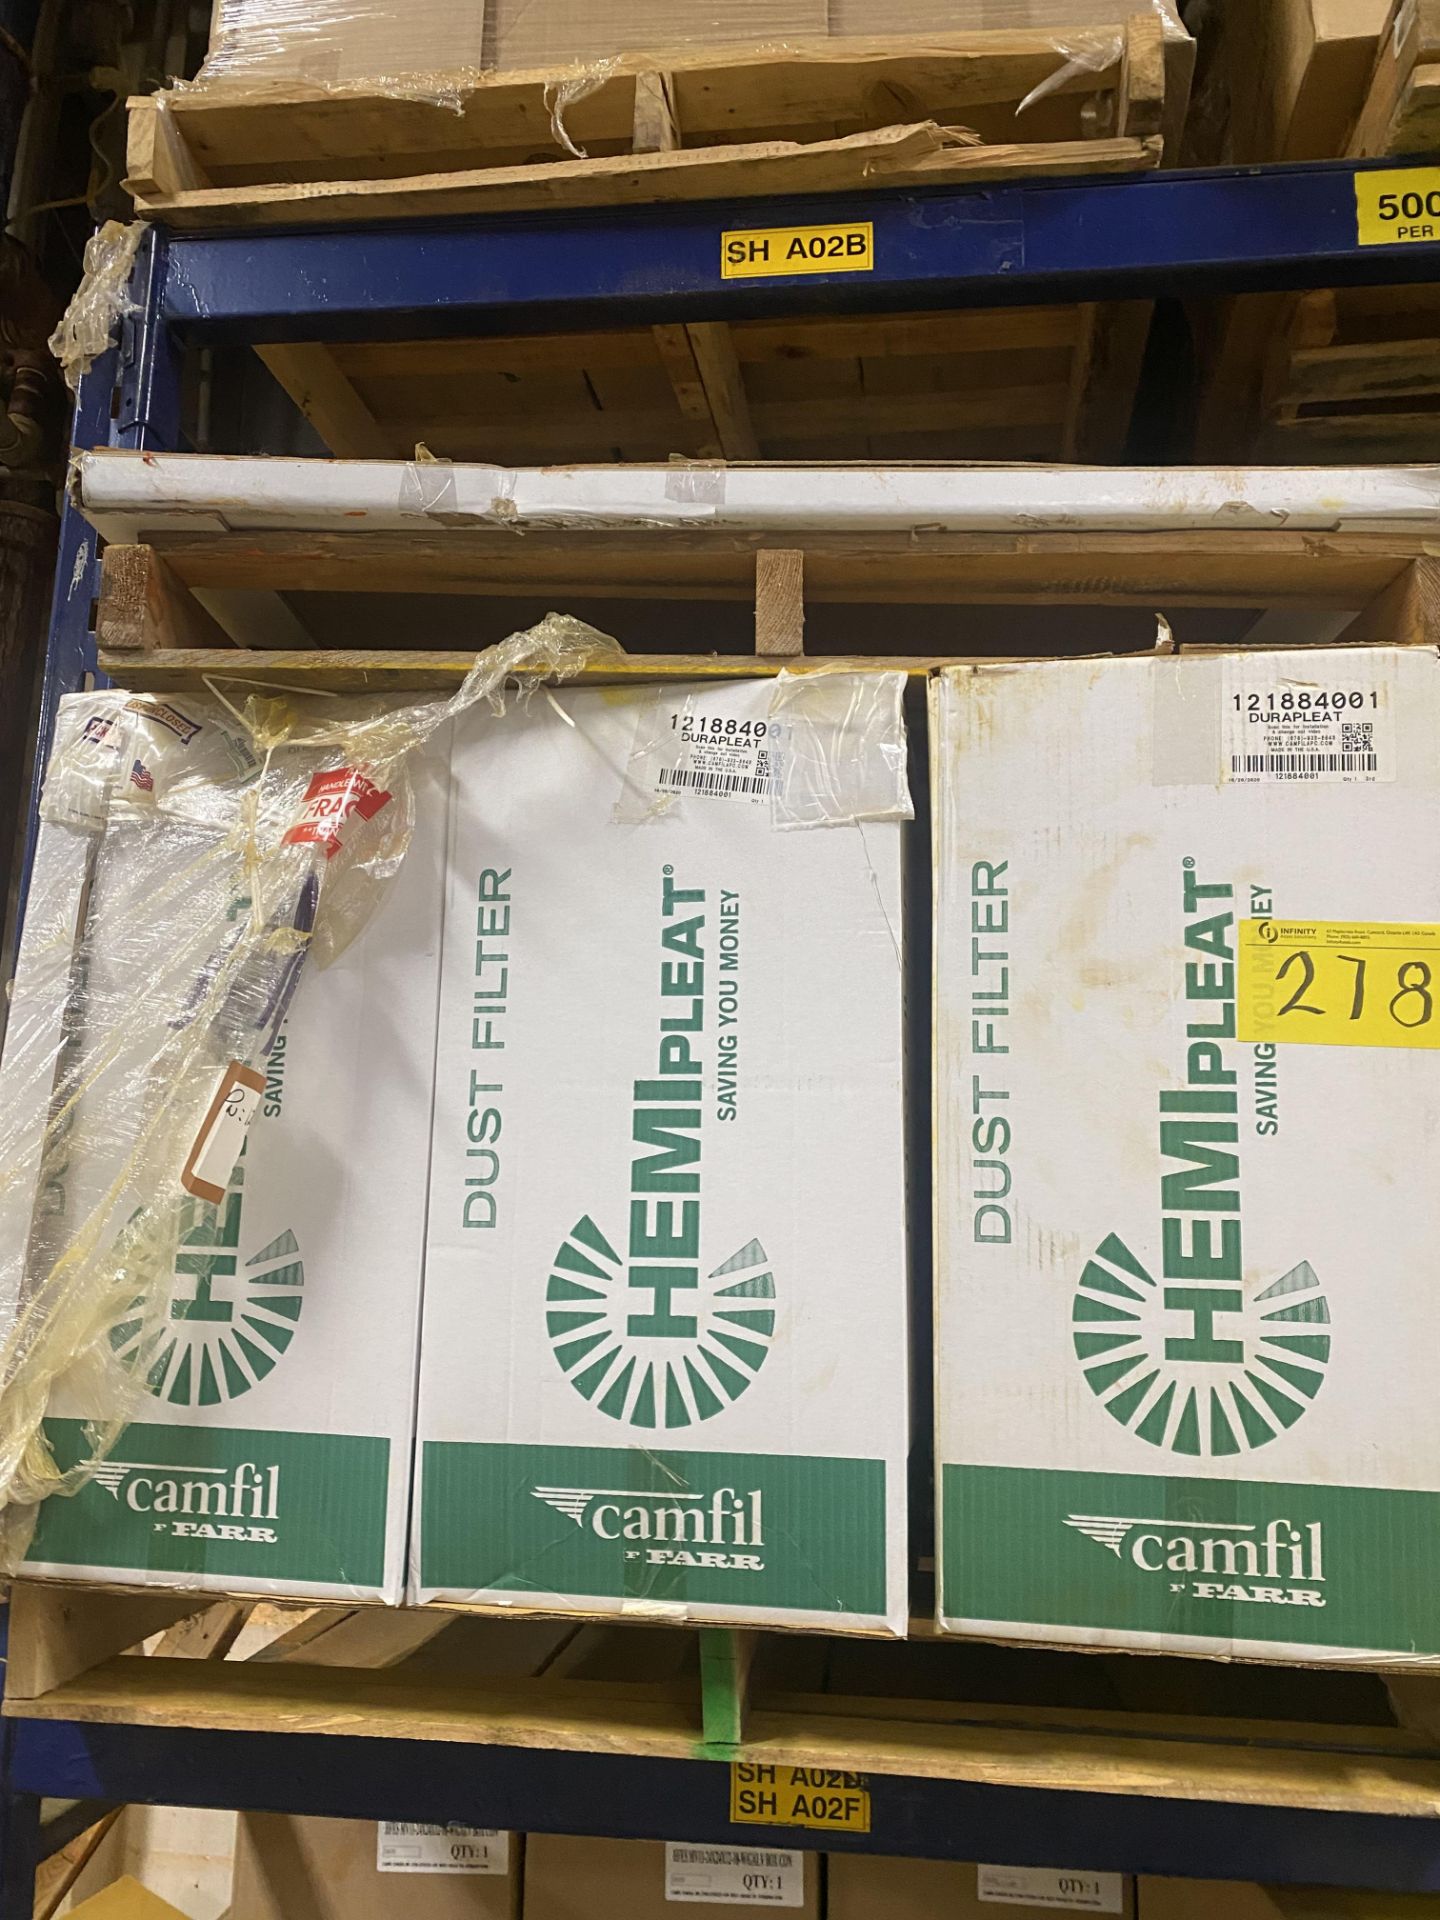 LOT OF (9) PALLETS OF CAMFIL FILTERS IN ROW